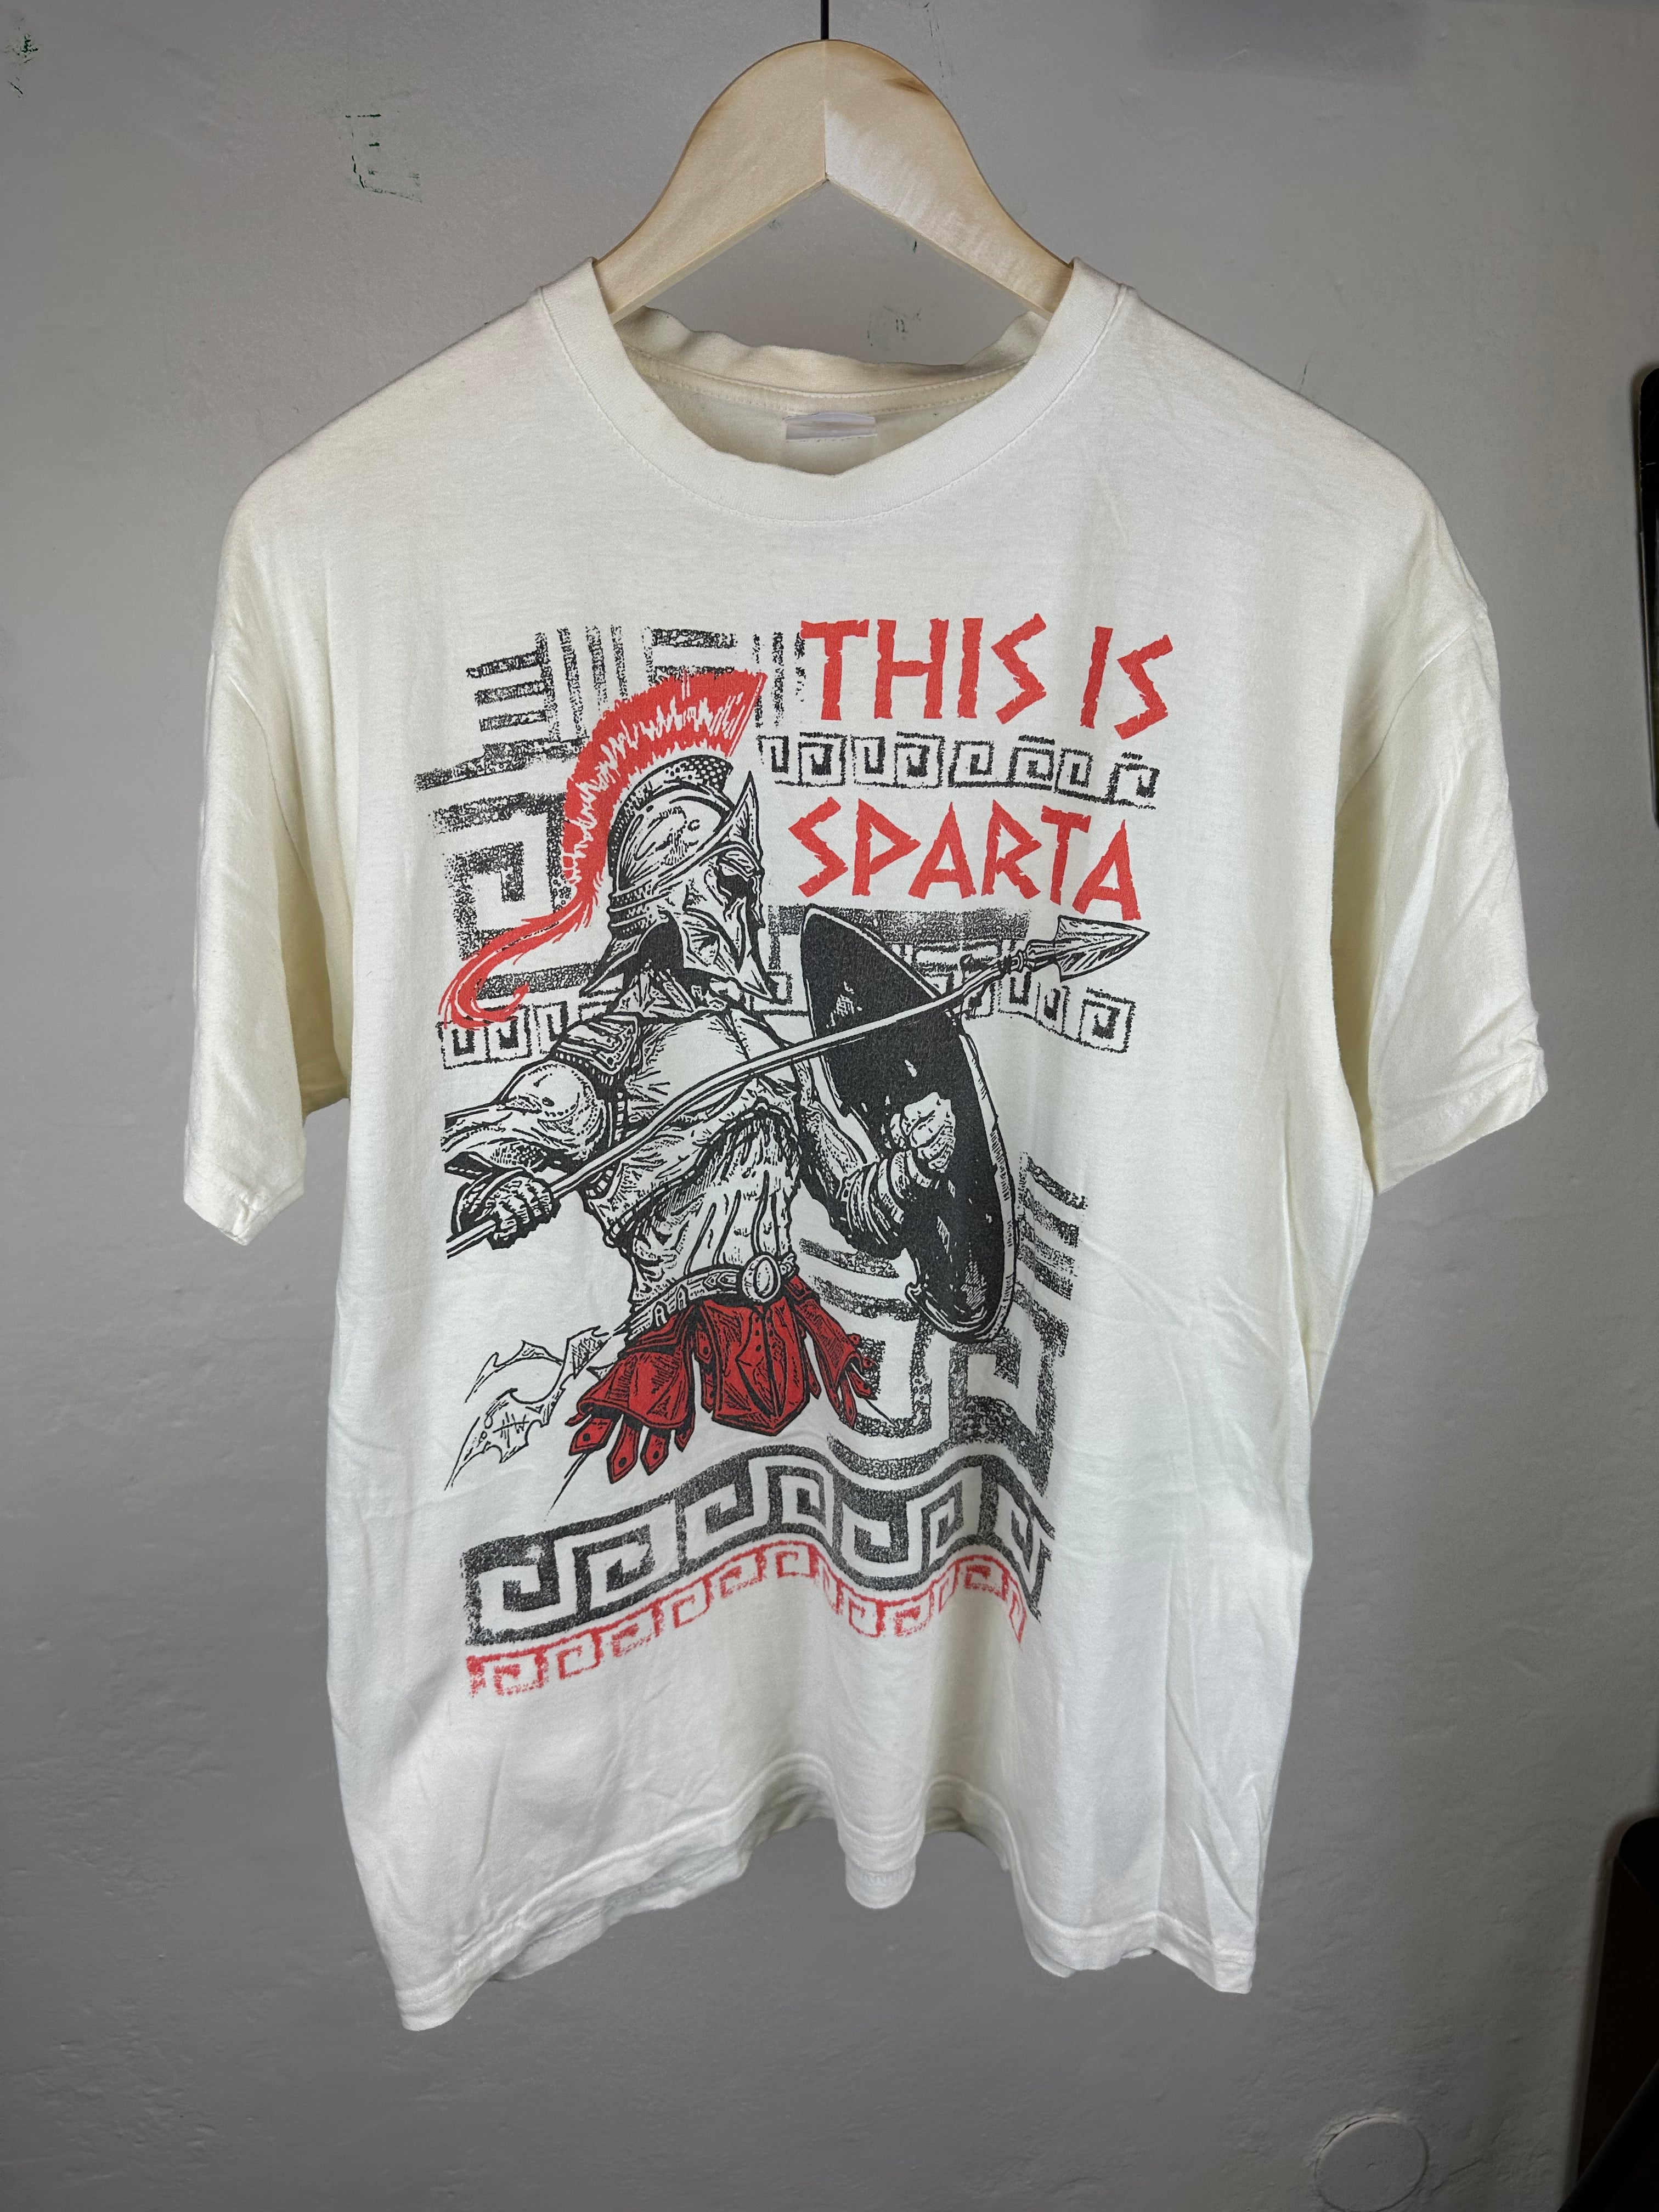 Vintage “This is Sparta” 00s T-shirt - size M